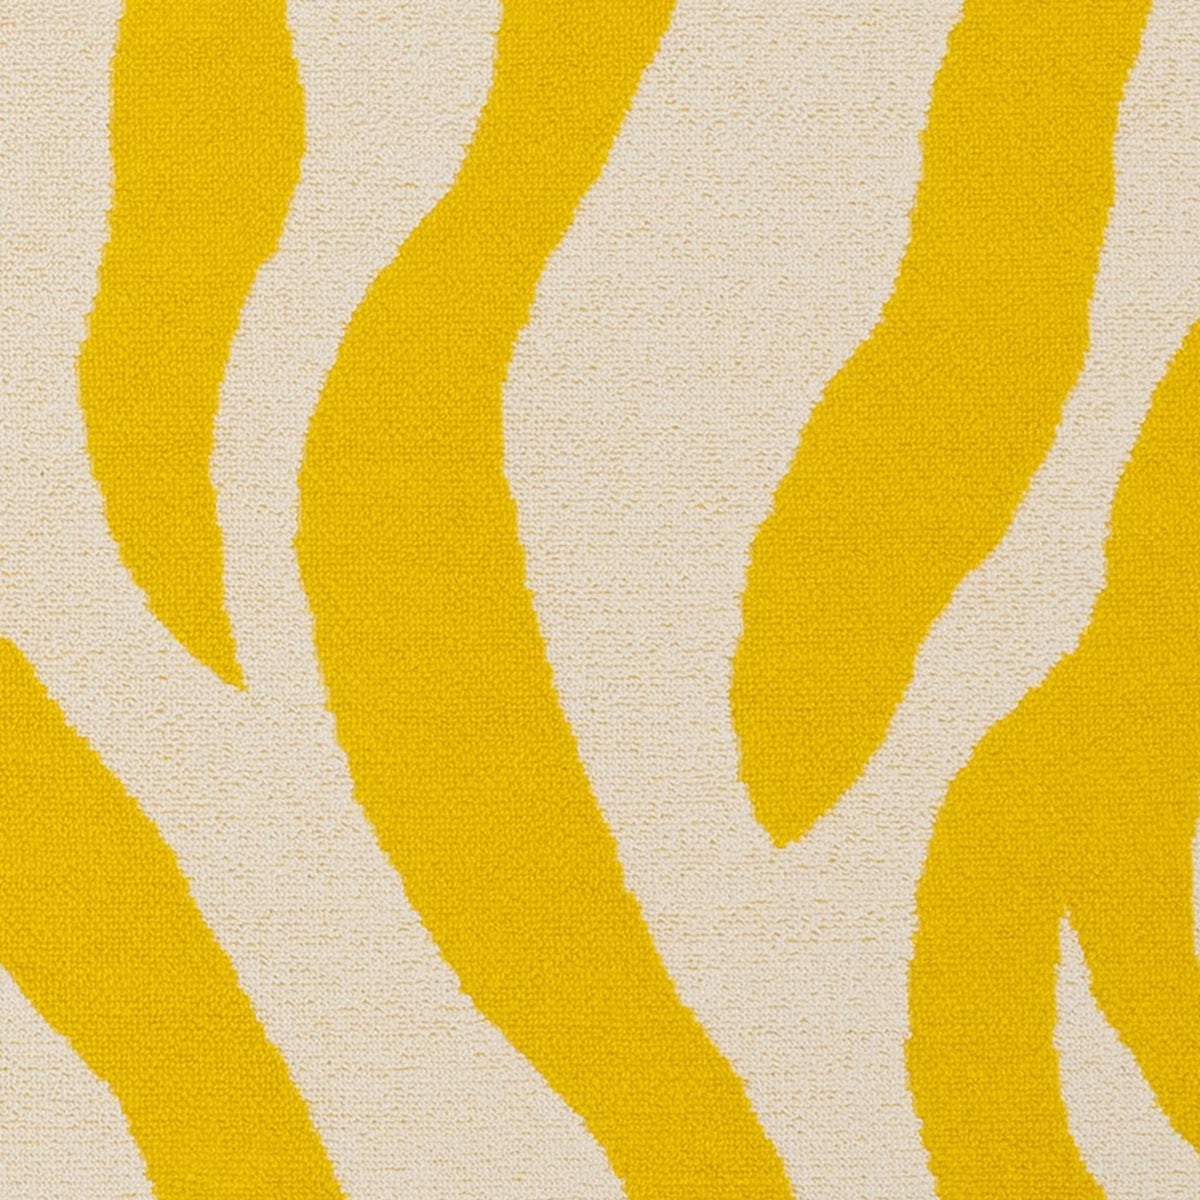 Swatch Sample of Abyss Habidecor Zebra Beach Towels in Color Banane (830)